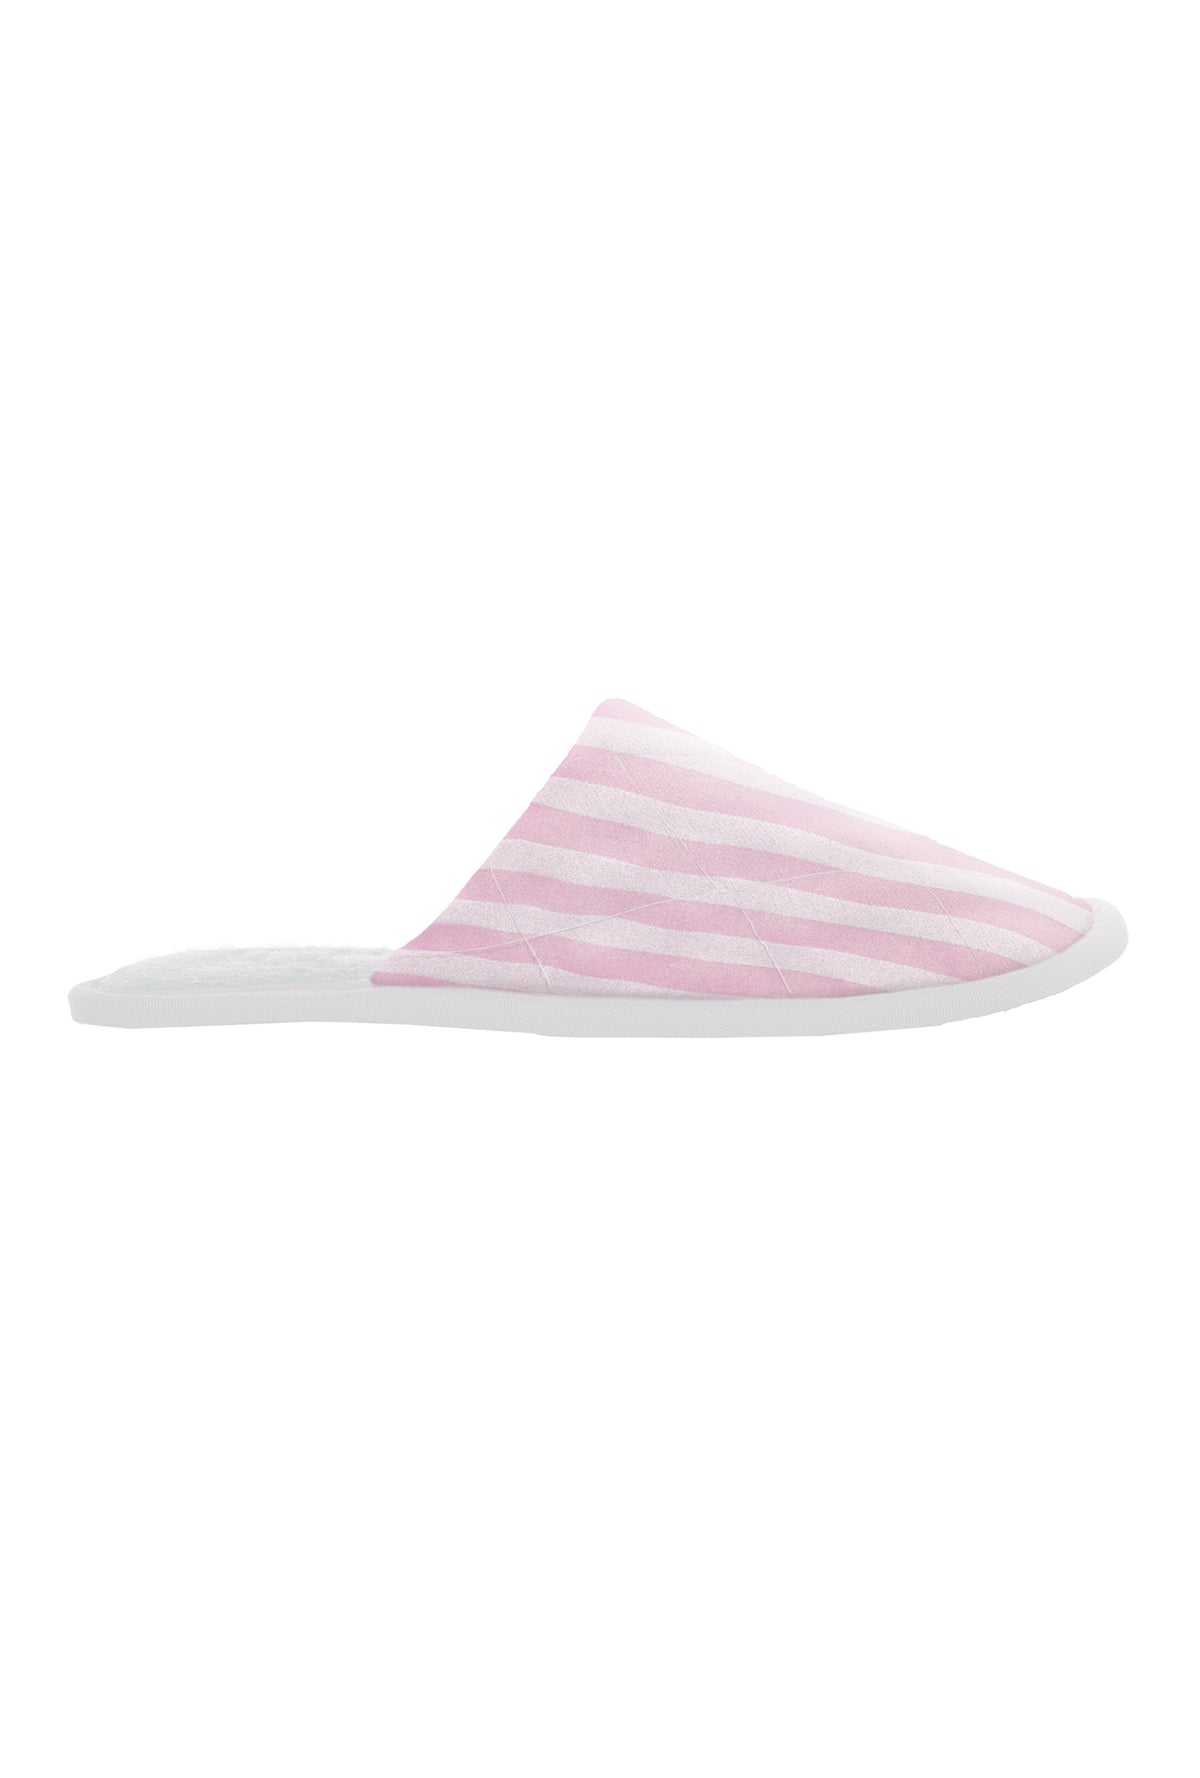 Pink 3D Stripe French Terry Lined Woven Cotton Unisex Slippers